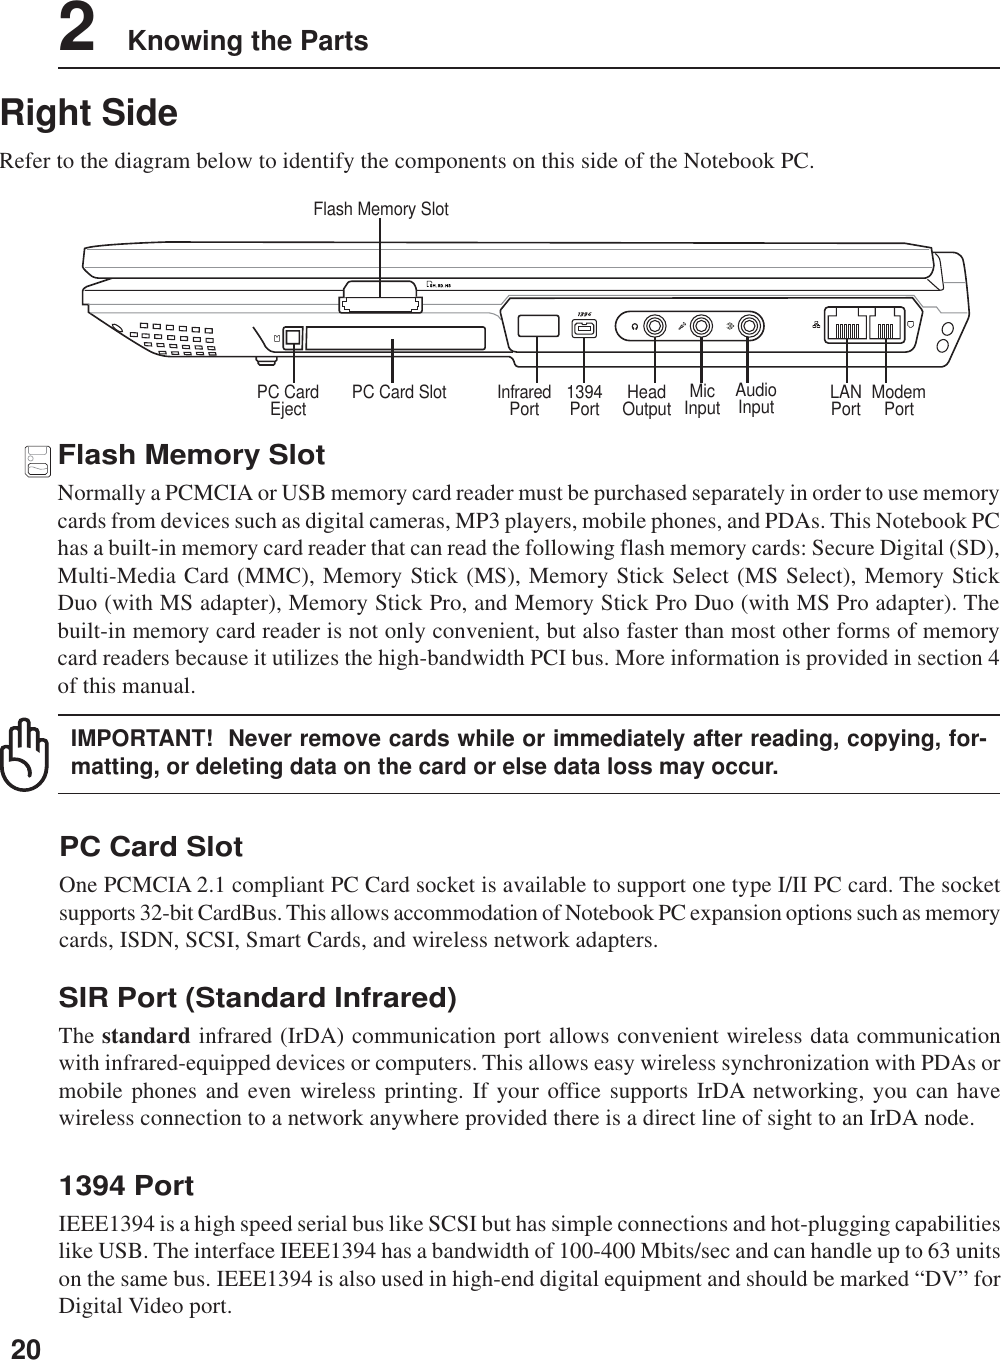 202    Knowing the PartsRight SideRefer to the diagram below to identify the components on this side of the Notebook PC.ModemPortLANPortFlash Memory SlotHeadOutput1394PortPC Card Slot MicInput AudioInputPC CardEject InfraredPort1394 PortIEEE1394 is a high speed serial bus like SCSI but has simple connections and hot-plugging capabilitieslike USB. The interface IEEE1394 has a bandwidth of 100-400 Mbits/sec and can handle up to 63 unitson the same bus. IEEE1394 is also used in high-end digital equipment and should be marked “DV” forDigital Video port.PC Card SlotOne PCMCIA 2.1 compliant PC Card socket is available to support one type I/II PC card. The socketsupports 32-bit CardBus. This allows accommodation of Notebook PC expansion options such as memorycards, ISDN, SCSI, Smart Cards, and wireless network adapters.Flash Memory SlotNormally a PCMCIA or USB memory card reader must be purchased separately in order to use memorycards from devices such as digital cameras, MP3 players, mobile phones, and PDAs. This Notebook PChas a built-in memory card reader that can read the following flash memory cards: Secure Digital (SD),Multi-Media Card (MMC), Memory Stick (MS), Memory Stick Select (MS Select), Memory StickDuo (with MS adapter), Memory Stick Pro, and Memory Stick Pro Duo (with MS Pro adapter). Thebuilt-in memory card reader is not only convenient, but also faster than most other forms of memorycard readers because it utilizes the high-bandwidth PCI bus. More information is provided in section 4of this manual.IMPORTANT!  Never remove cards while or immediately after reading, copying, for-matting, or deleting data on the card or else data loss may occur.SIR Port (Standard Infrared)The standard infrared (IrDA) communication port allows convenient wireless data communicationwith infrared-equipped devices or computers. This allows easy wireless synchronization with PDAs ormobile phones and even wireless printing. If your office supports IrDA networking, you can havewireless connection to a network anywhere provided there is a direct line of sight to an IrDA node.